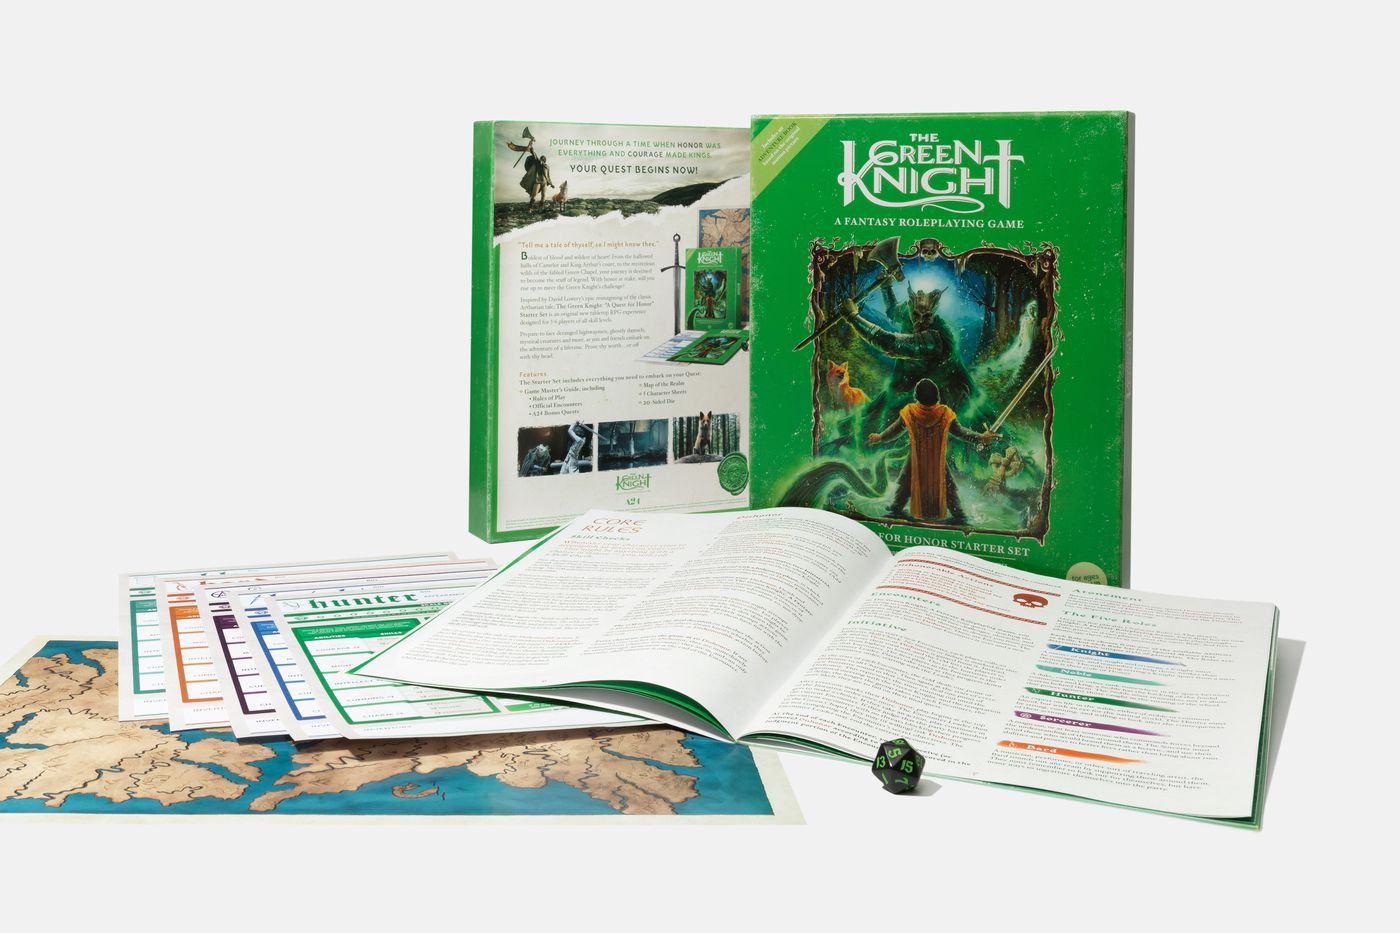 THE GREEN KNIGHT FANTASY ROLEPLAYING GAME